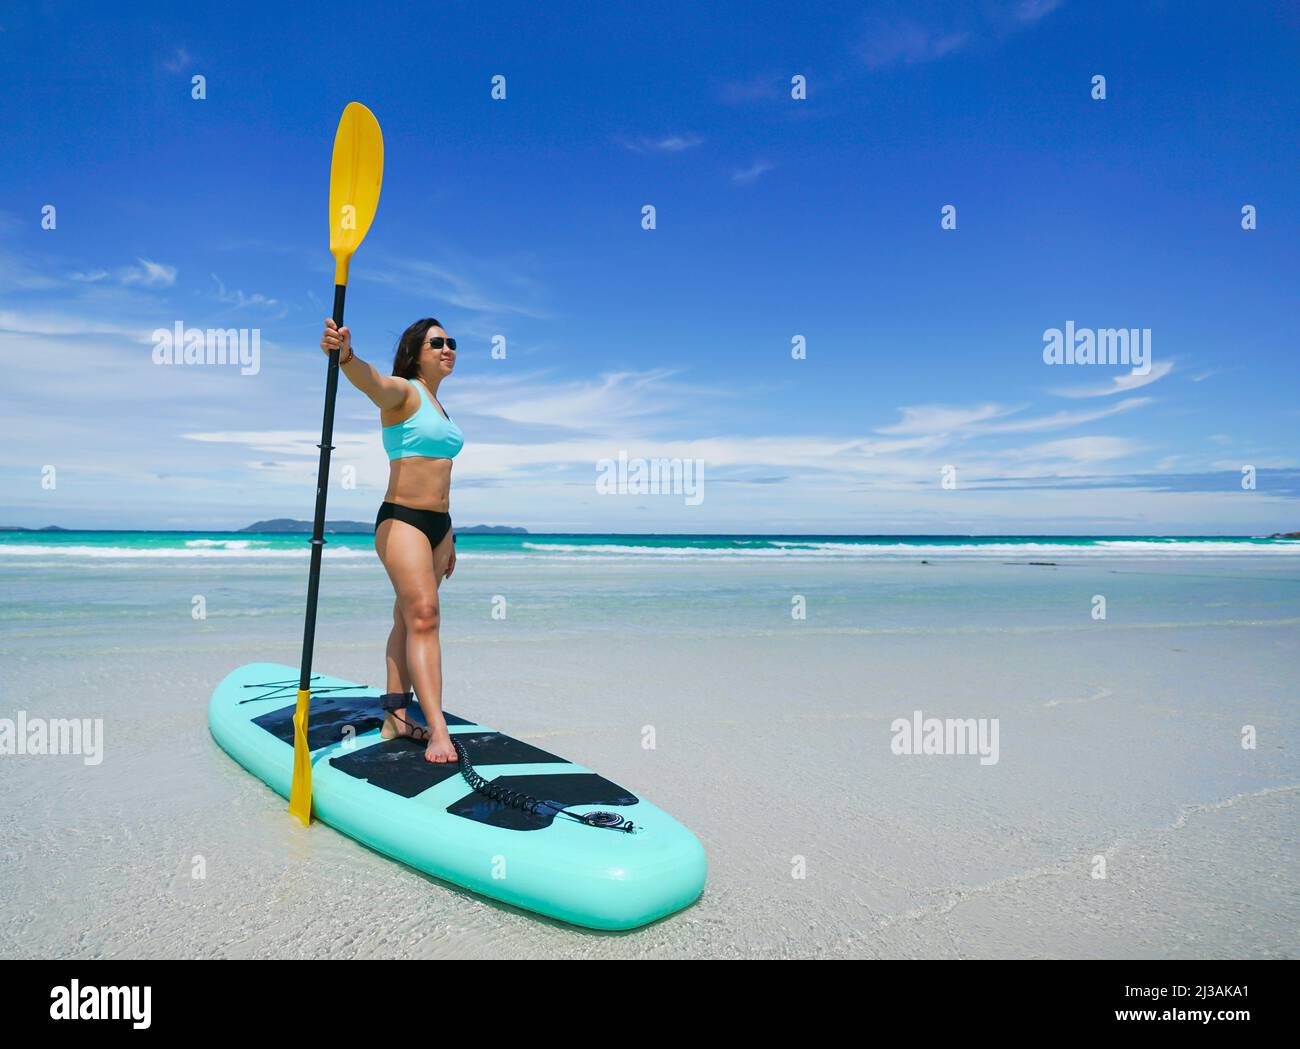 woman on sup board or paddle board at the beach Stock Photo